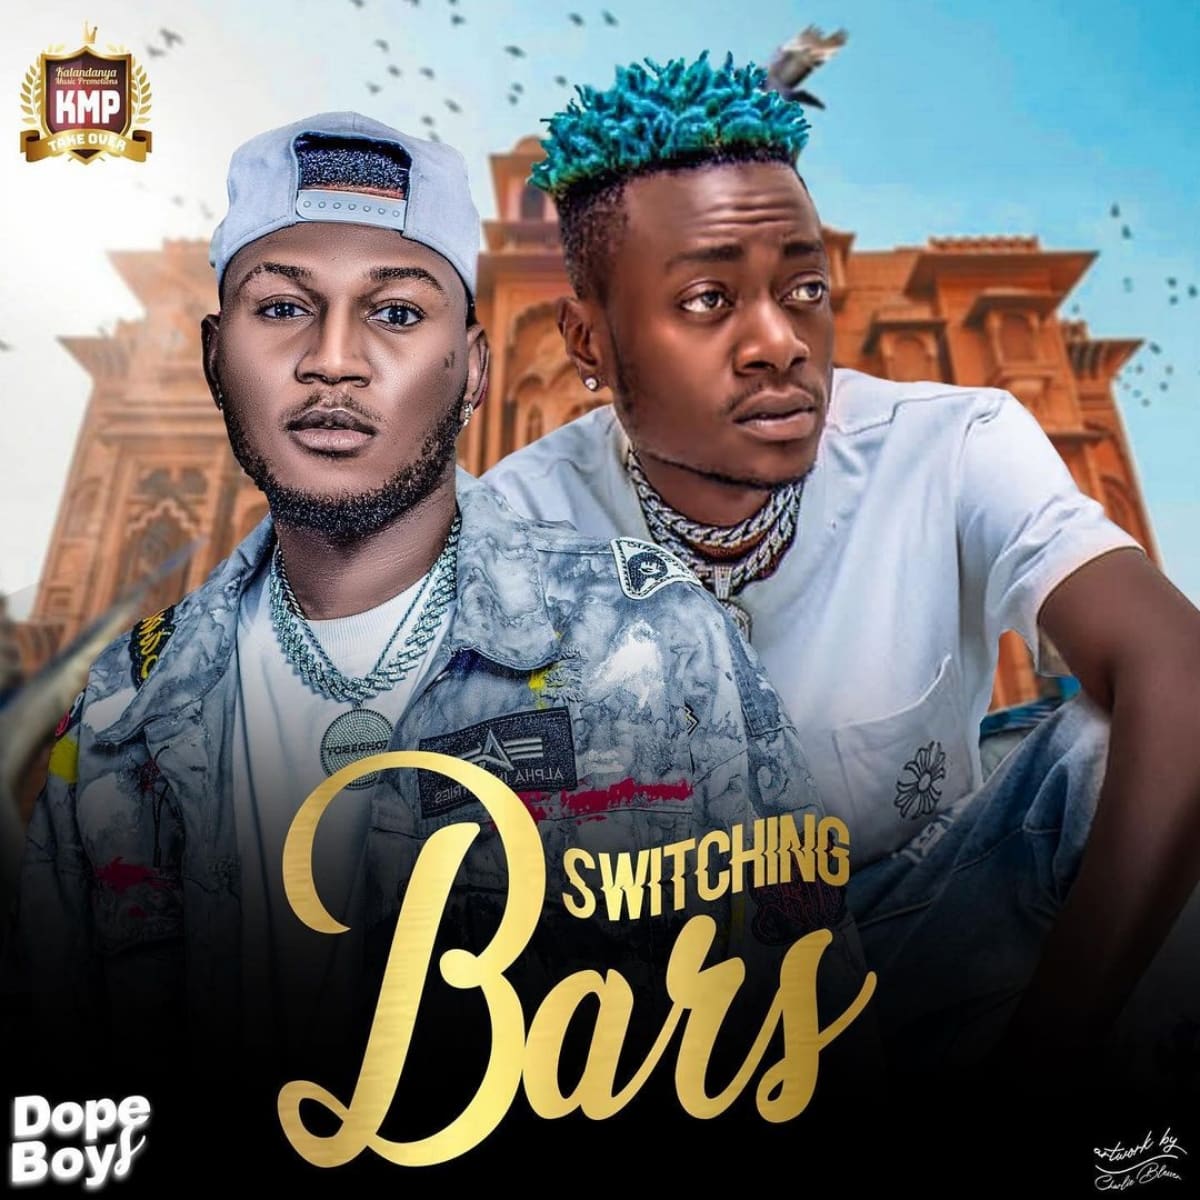 DOWNLOAD: Dope Boys – “Switching Bars” Mp3